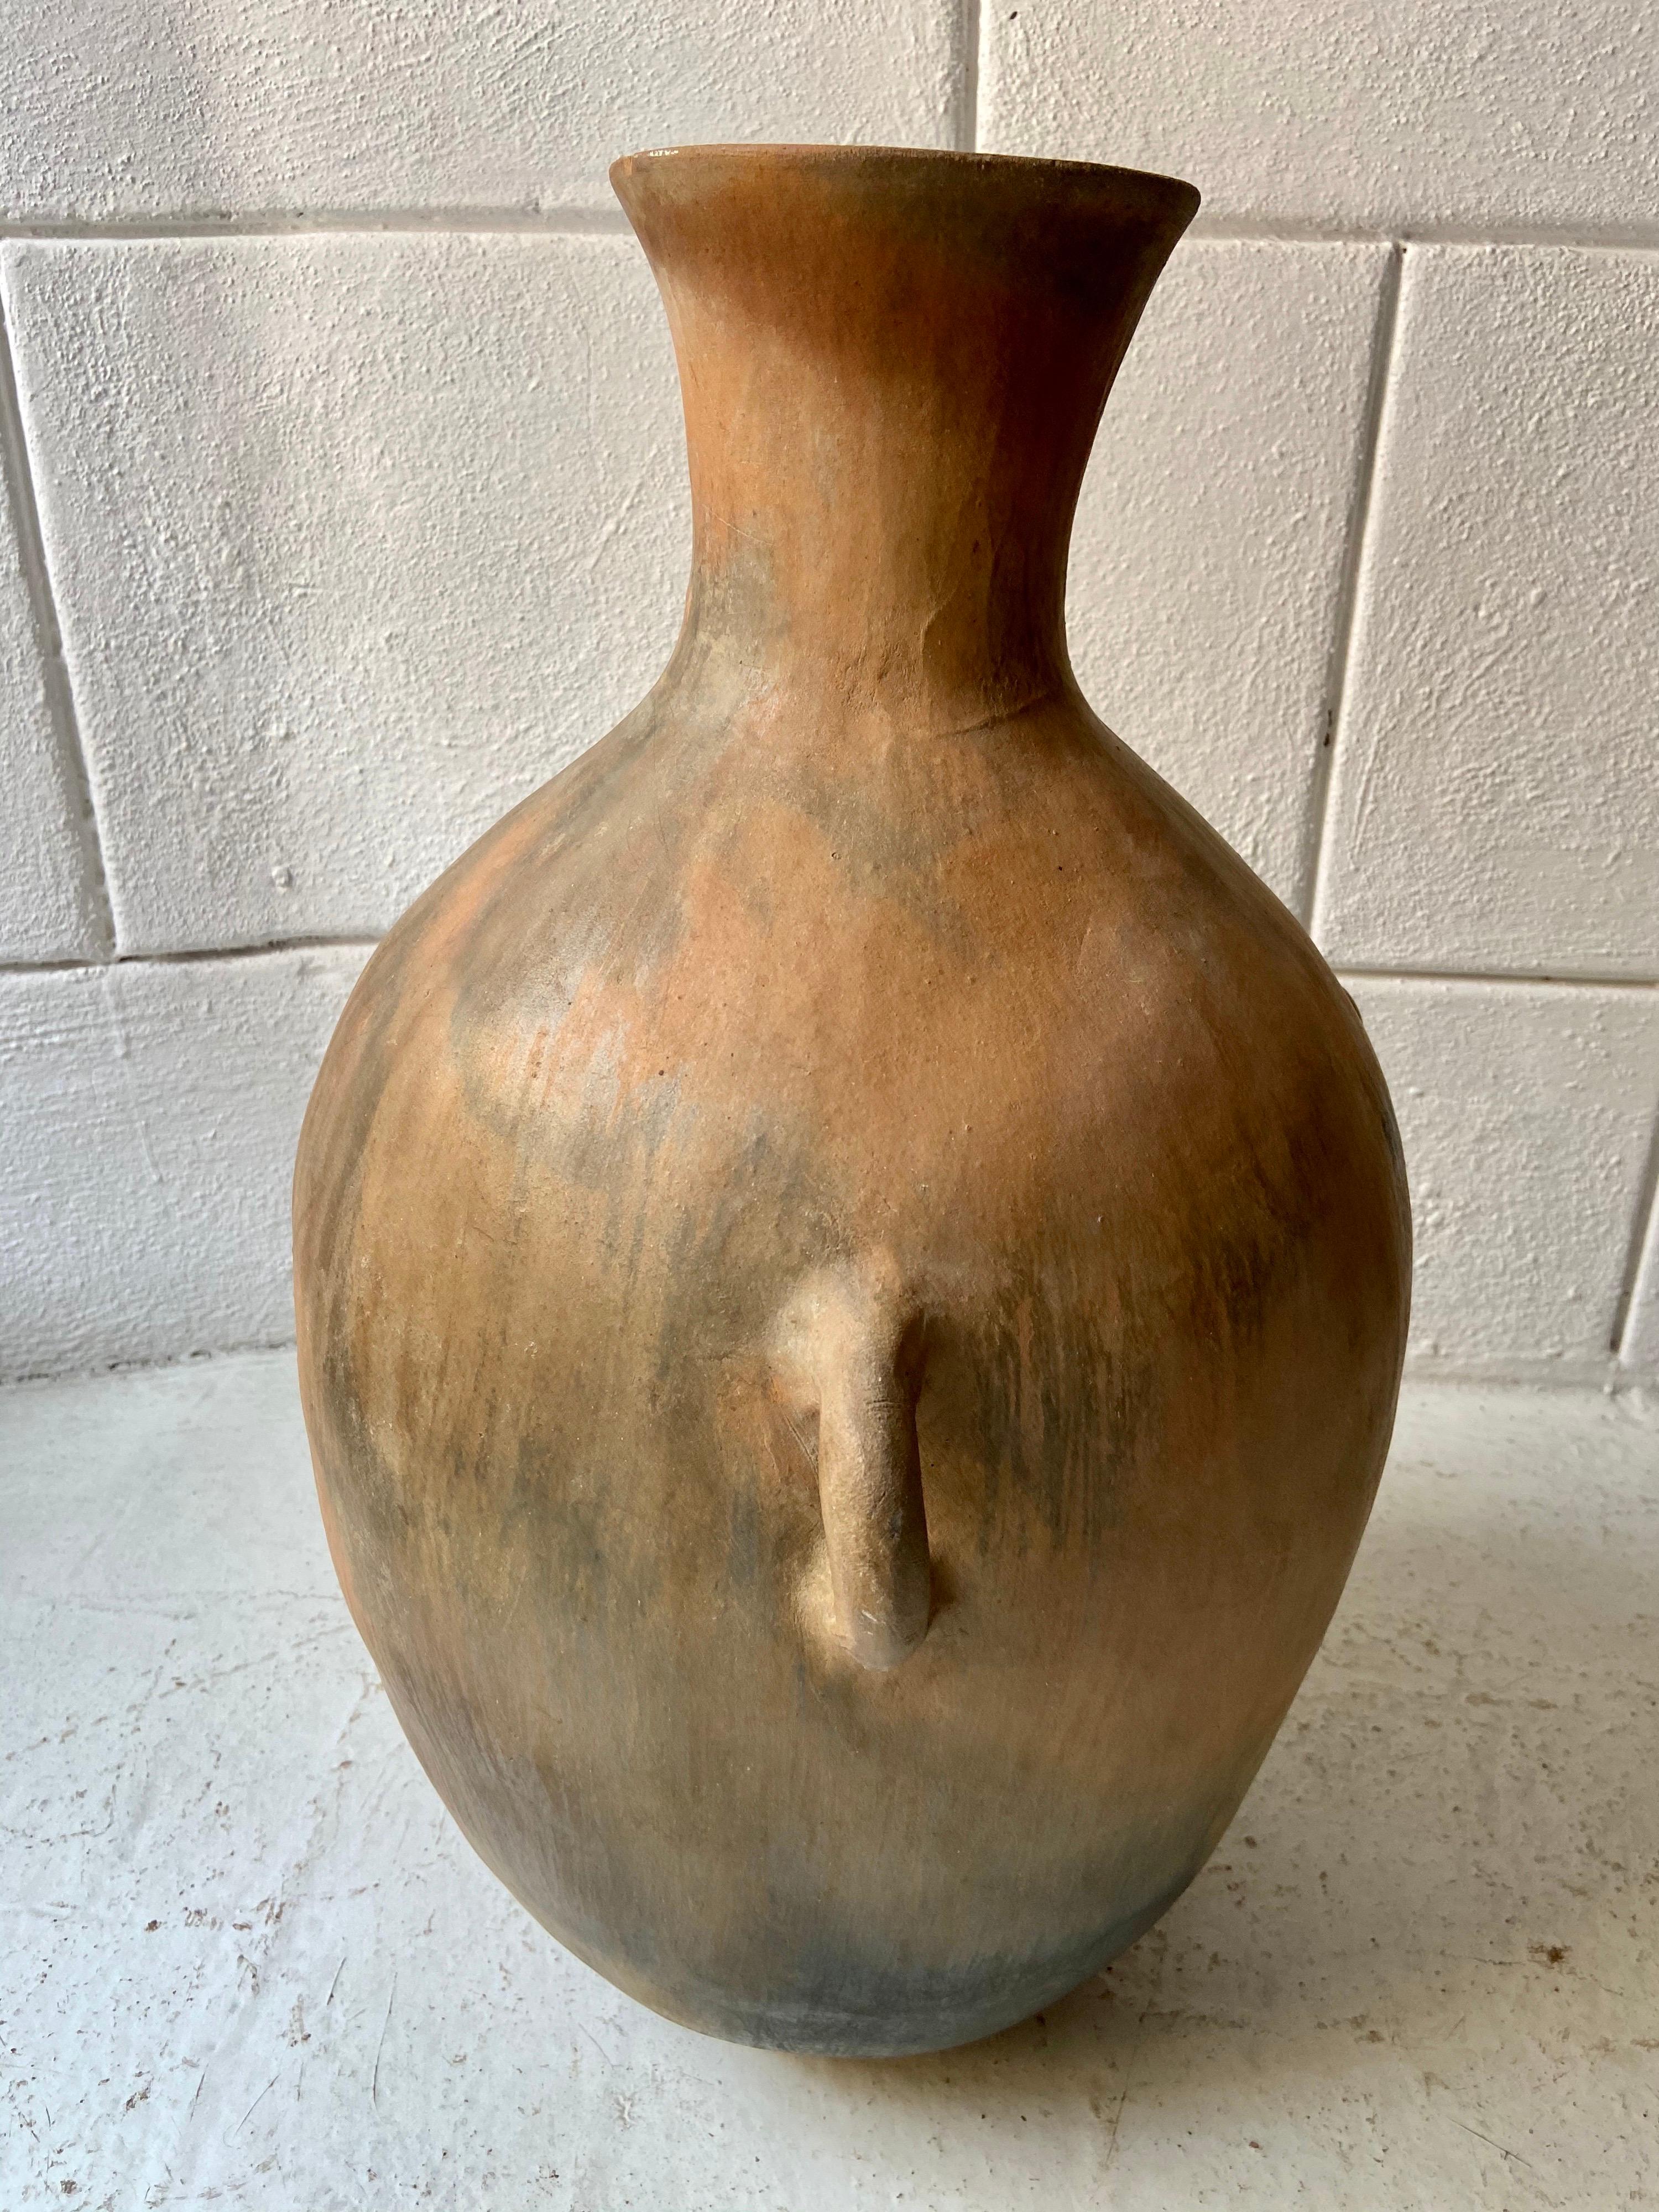 Hand-Crafted Mid-20th Century Terracotta Water Vessel from Mexico